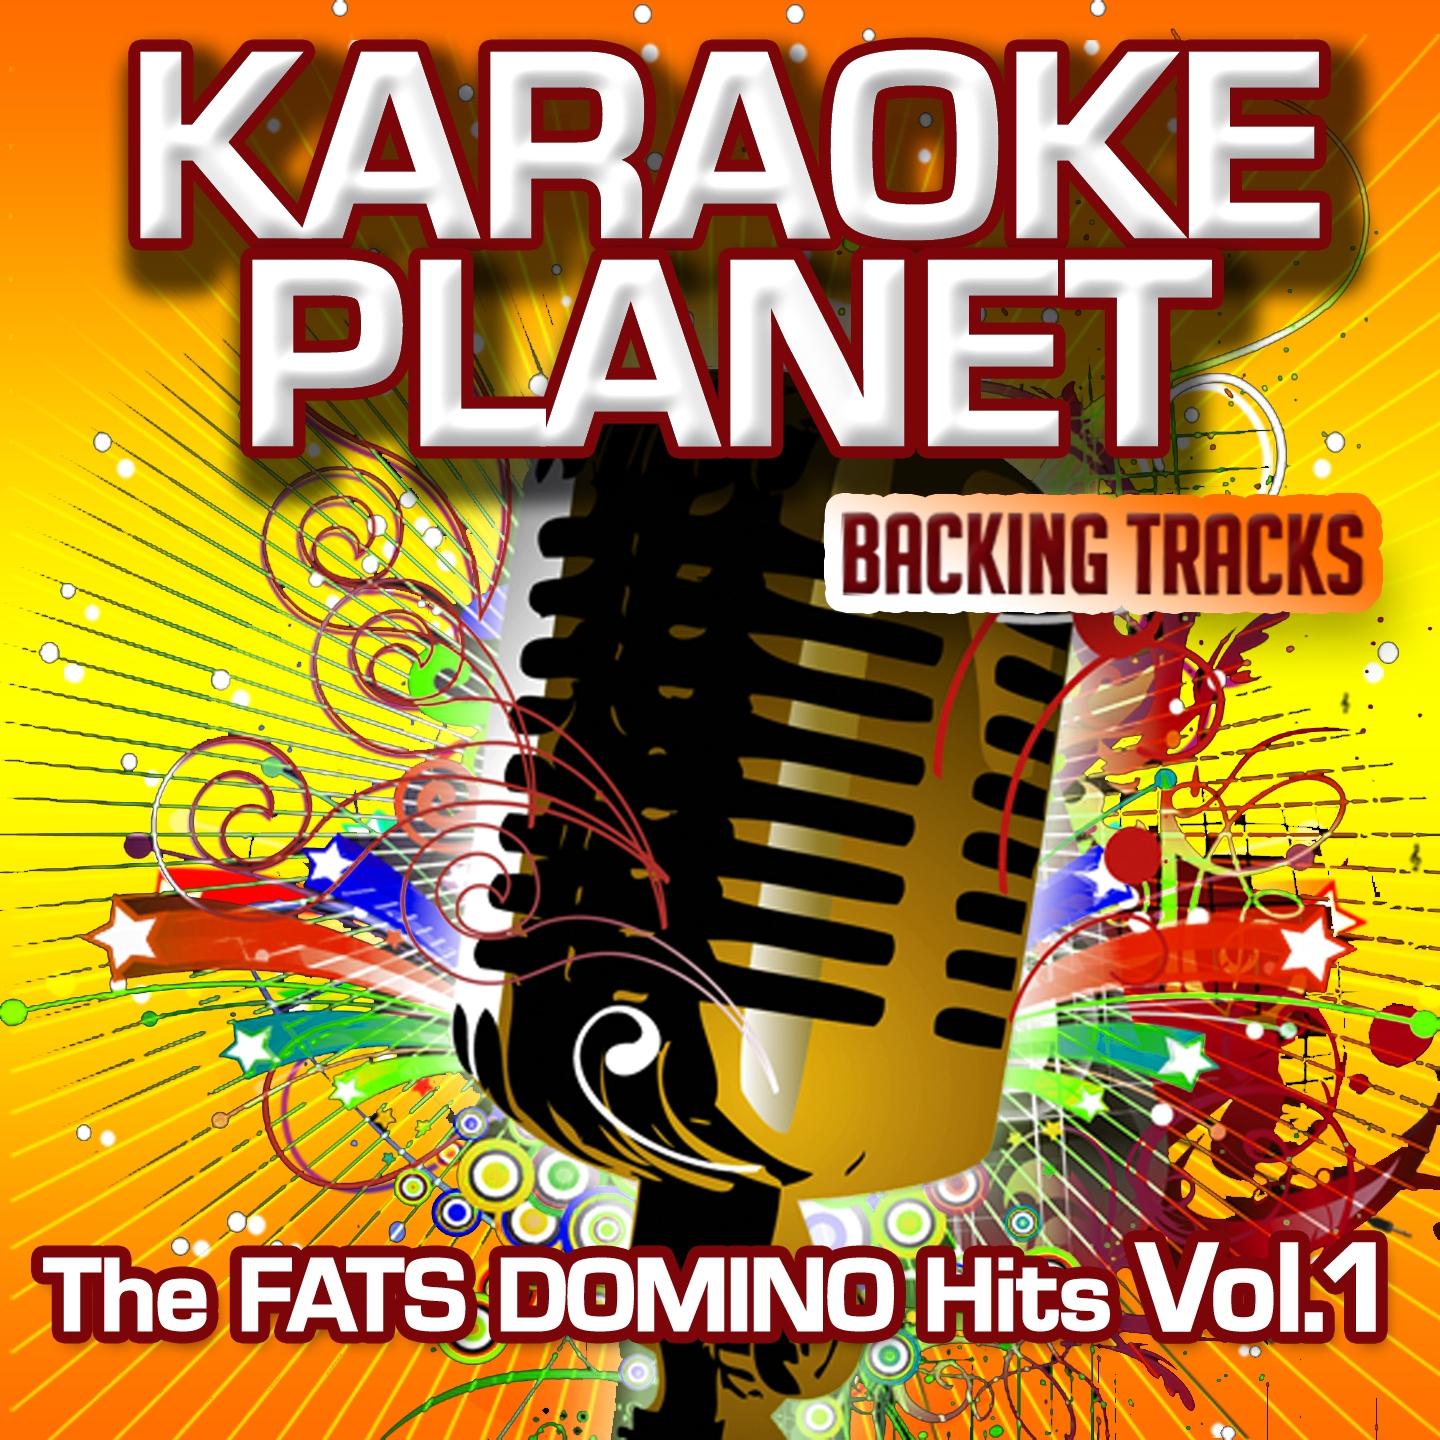 I'm Gonna Be a Wheel Someday (Karaoke Version In the Art of Fats Domino)